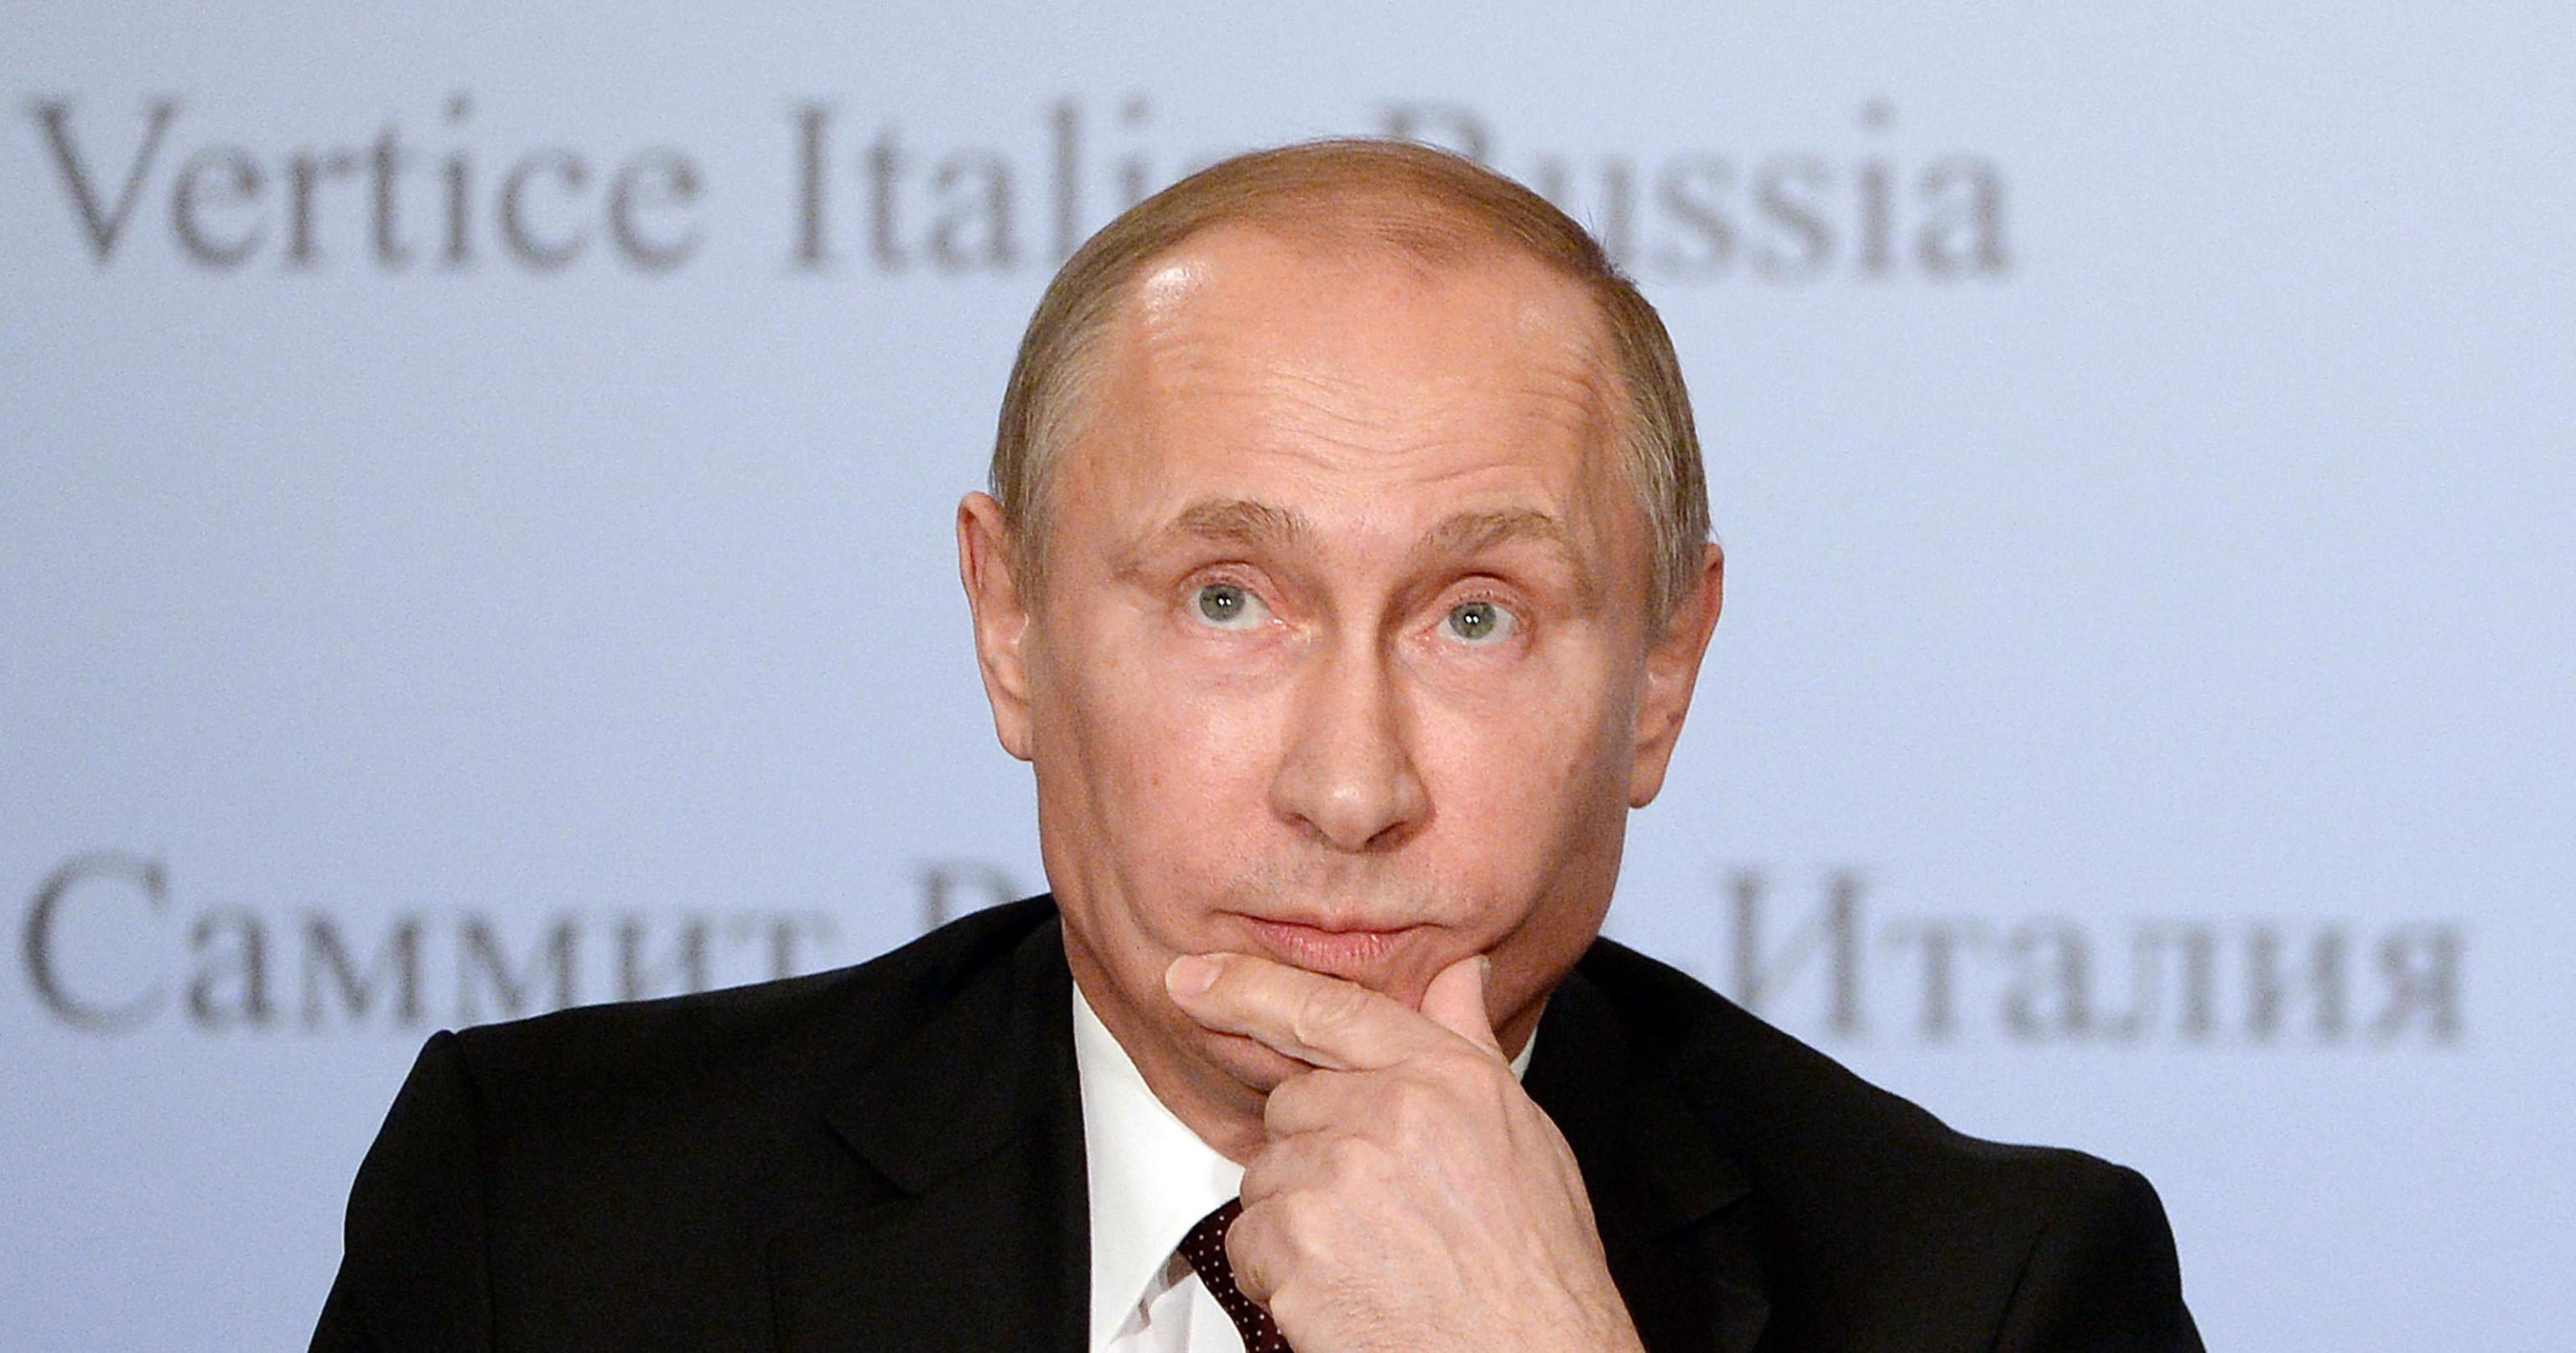 Russia's President Putin at a press conference in Italy on Tuesday. Photo: EPA 